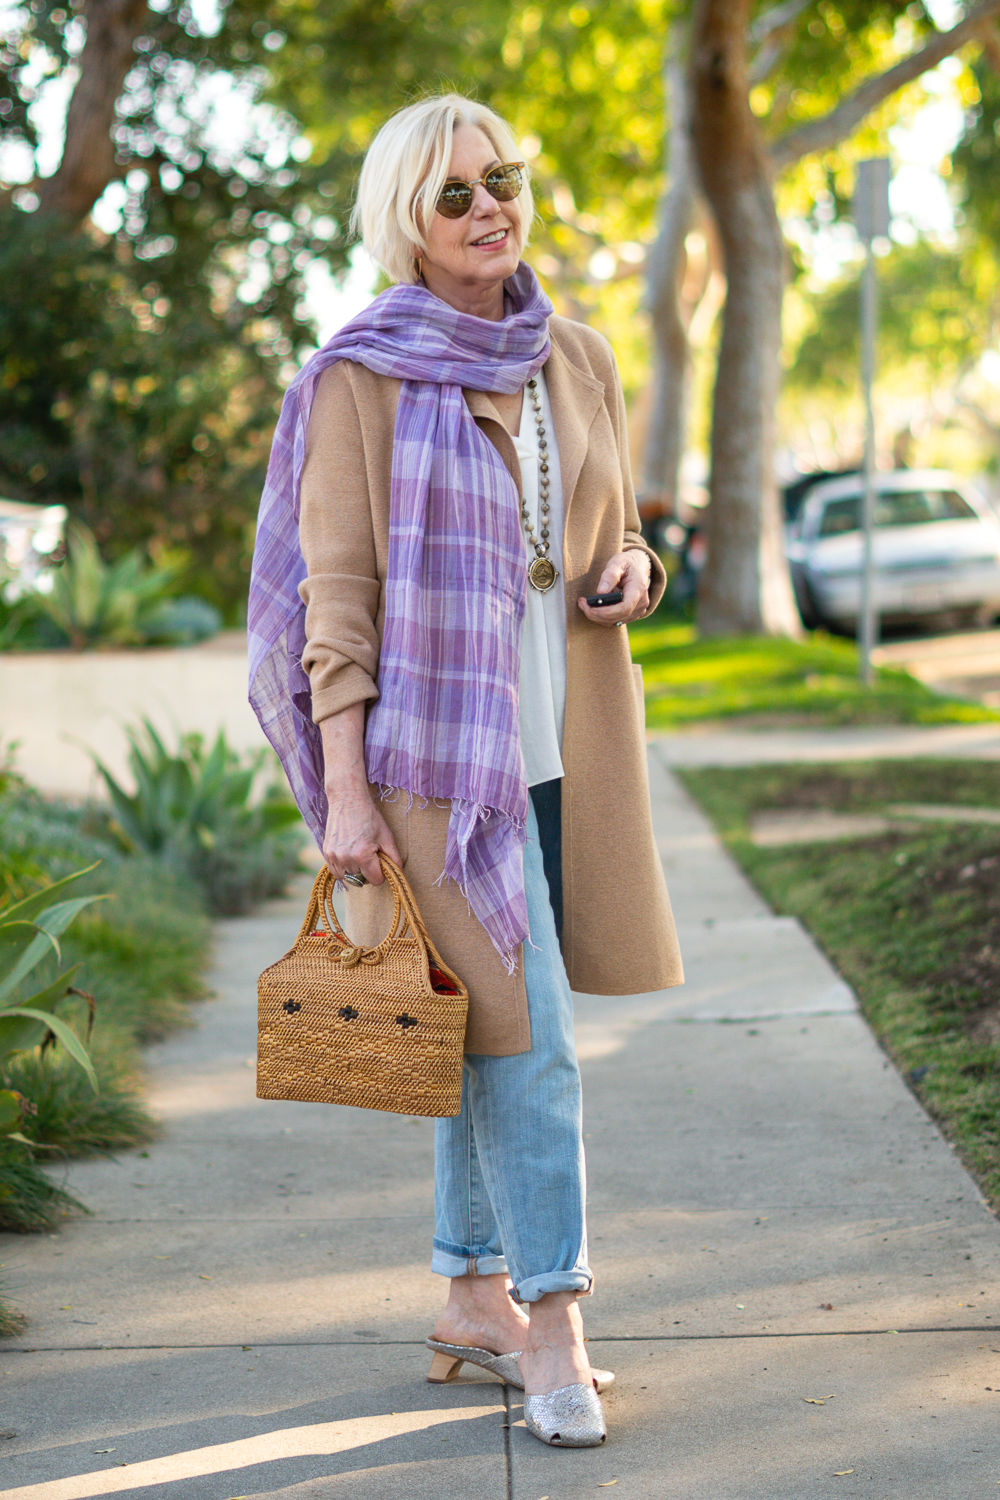 Susan B of une femme d'un certain age wears a casual look with camel sweater coat, lavender scarf and metallic mules.